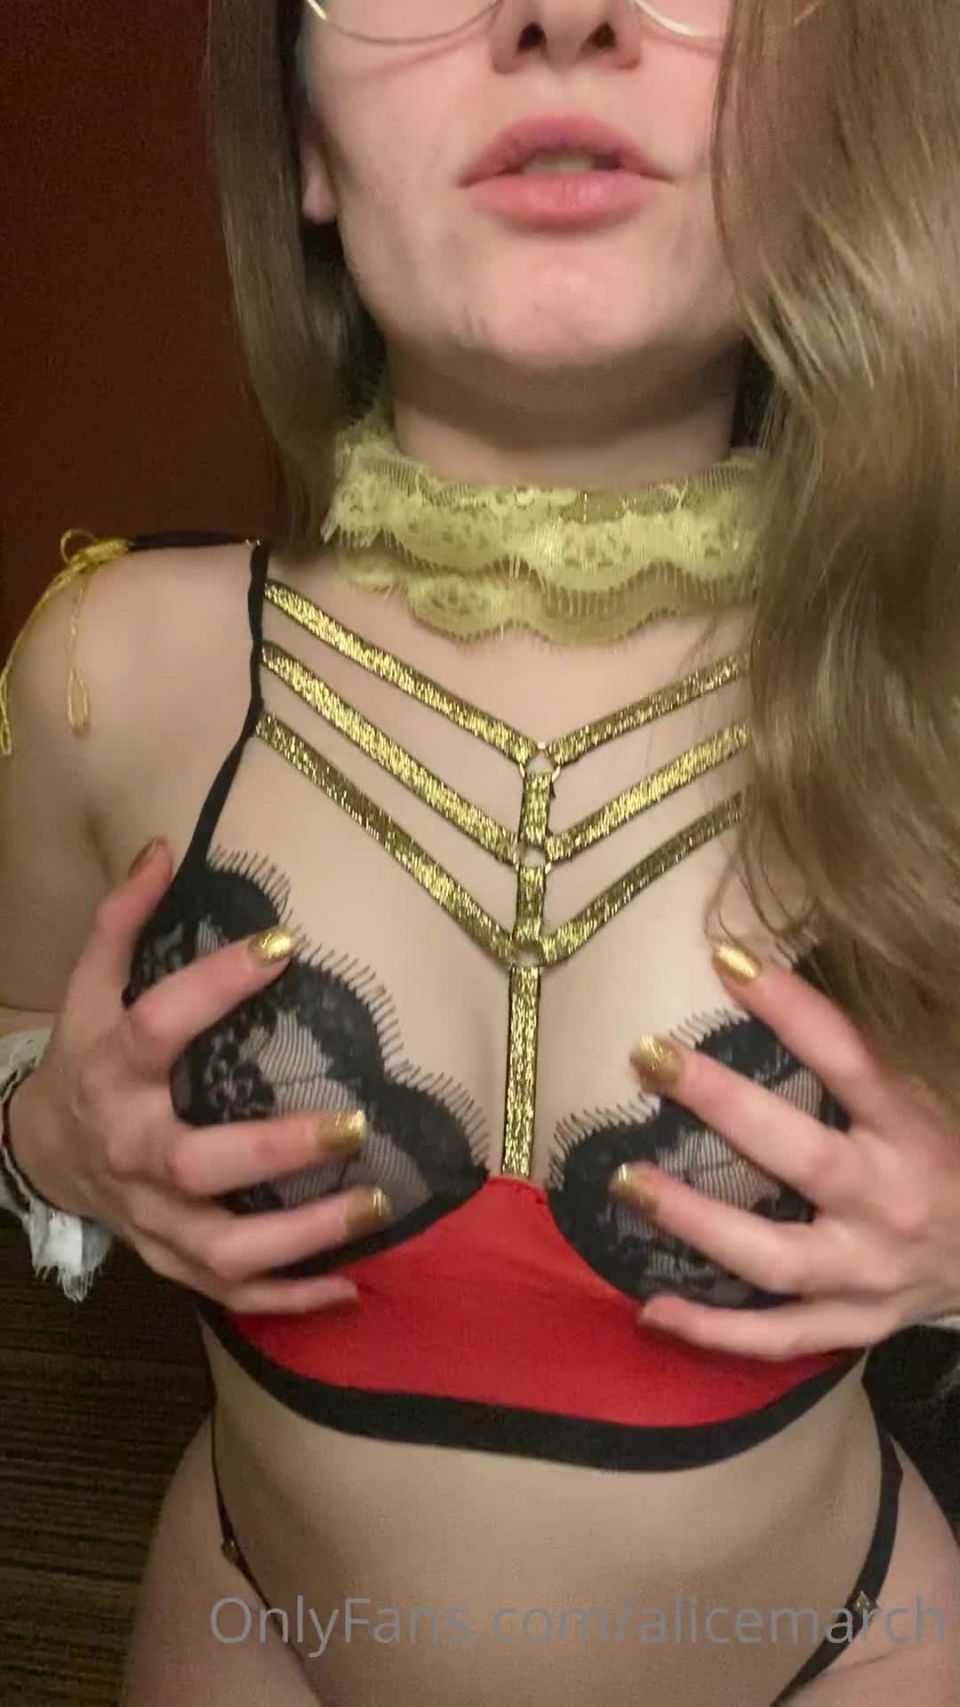 Alice march () Alicemarch - check your dm for this sexy nutt cracker video let me help you make this christmas a naug 25-12-2020